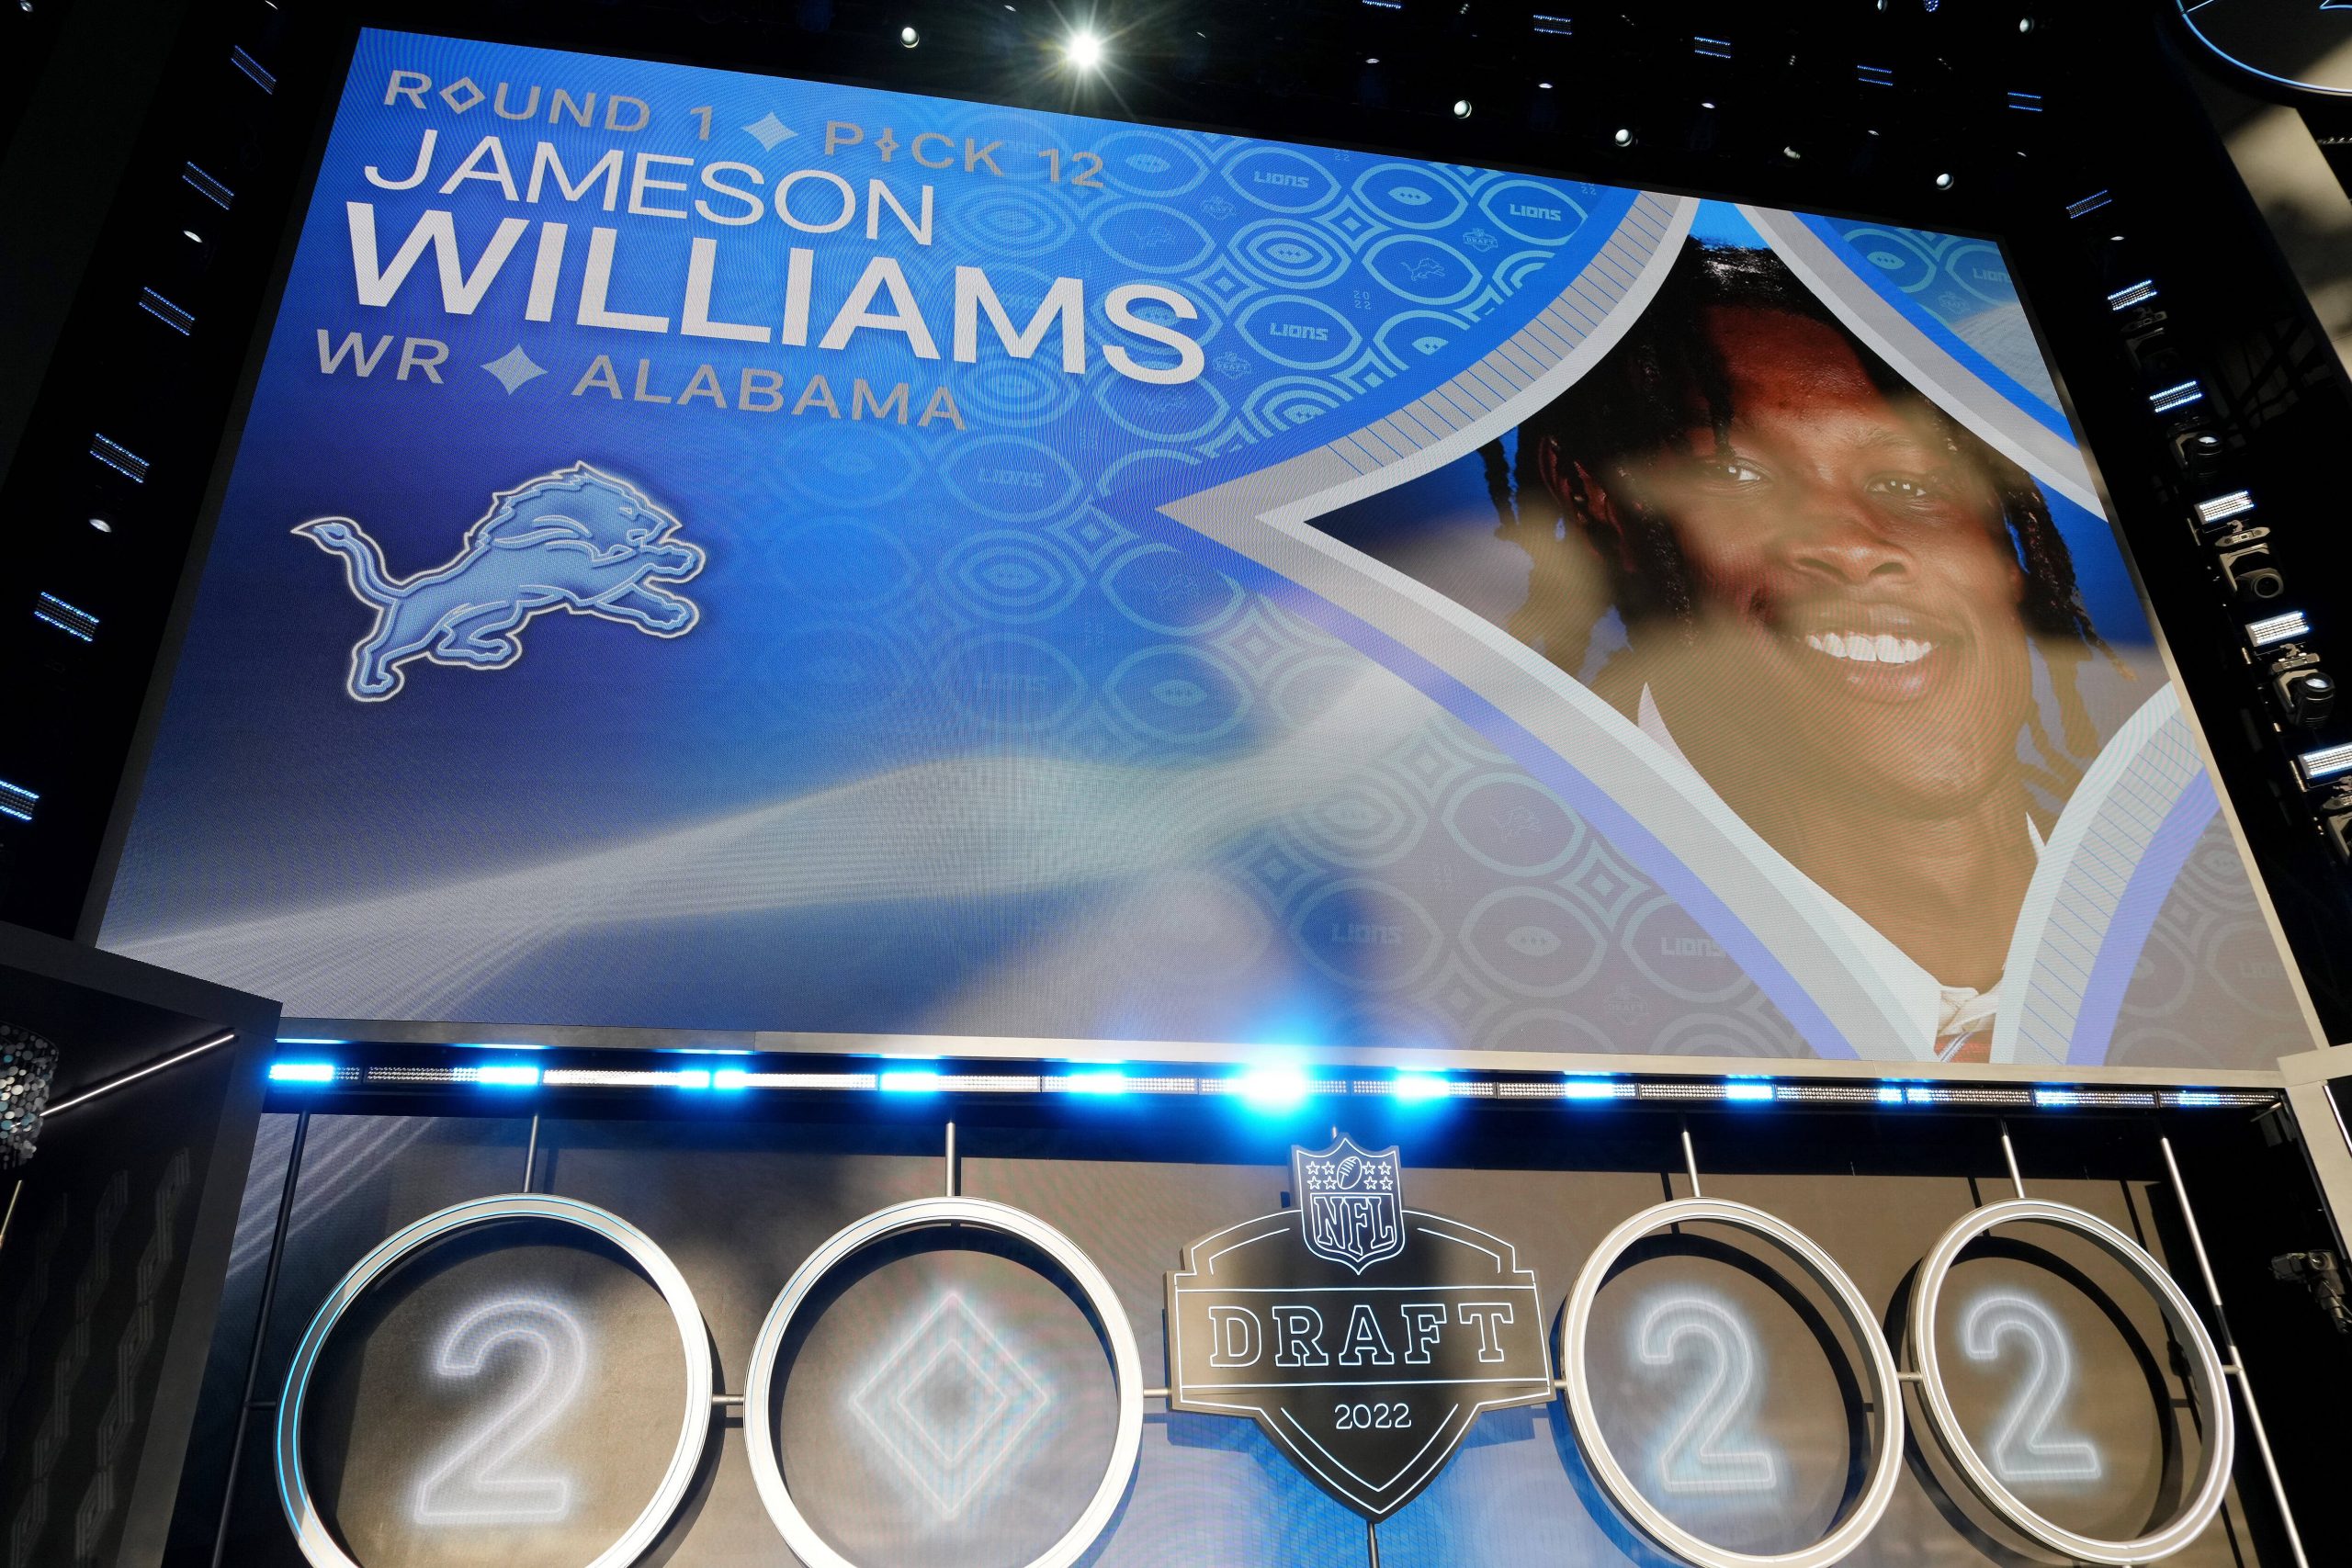 Jameson Williams - NFL, American Football Herren, USA NFL Draft, Apr 28, 2022 Las Vegas, NV, USA Alabama wide receiver Jameson Williams is announced as the twelfth overall pick to the Detroit Lions during the first round of the 2022 NFL Draft at the NFL Draft Theater. Mandatory Credit: Kirby Lee-USA TODAY Sports, 28.04.2022 18:31:56, 18170370, NPStrans, Jameson Williams, Detroit Lions, TopPic, NFL Draft, NFL PUBLICATIONxINxGERxSUIxAUTxONLY Copyright: xKirbyxLeex 18170370